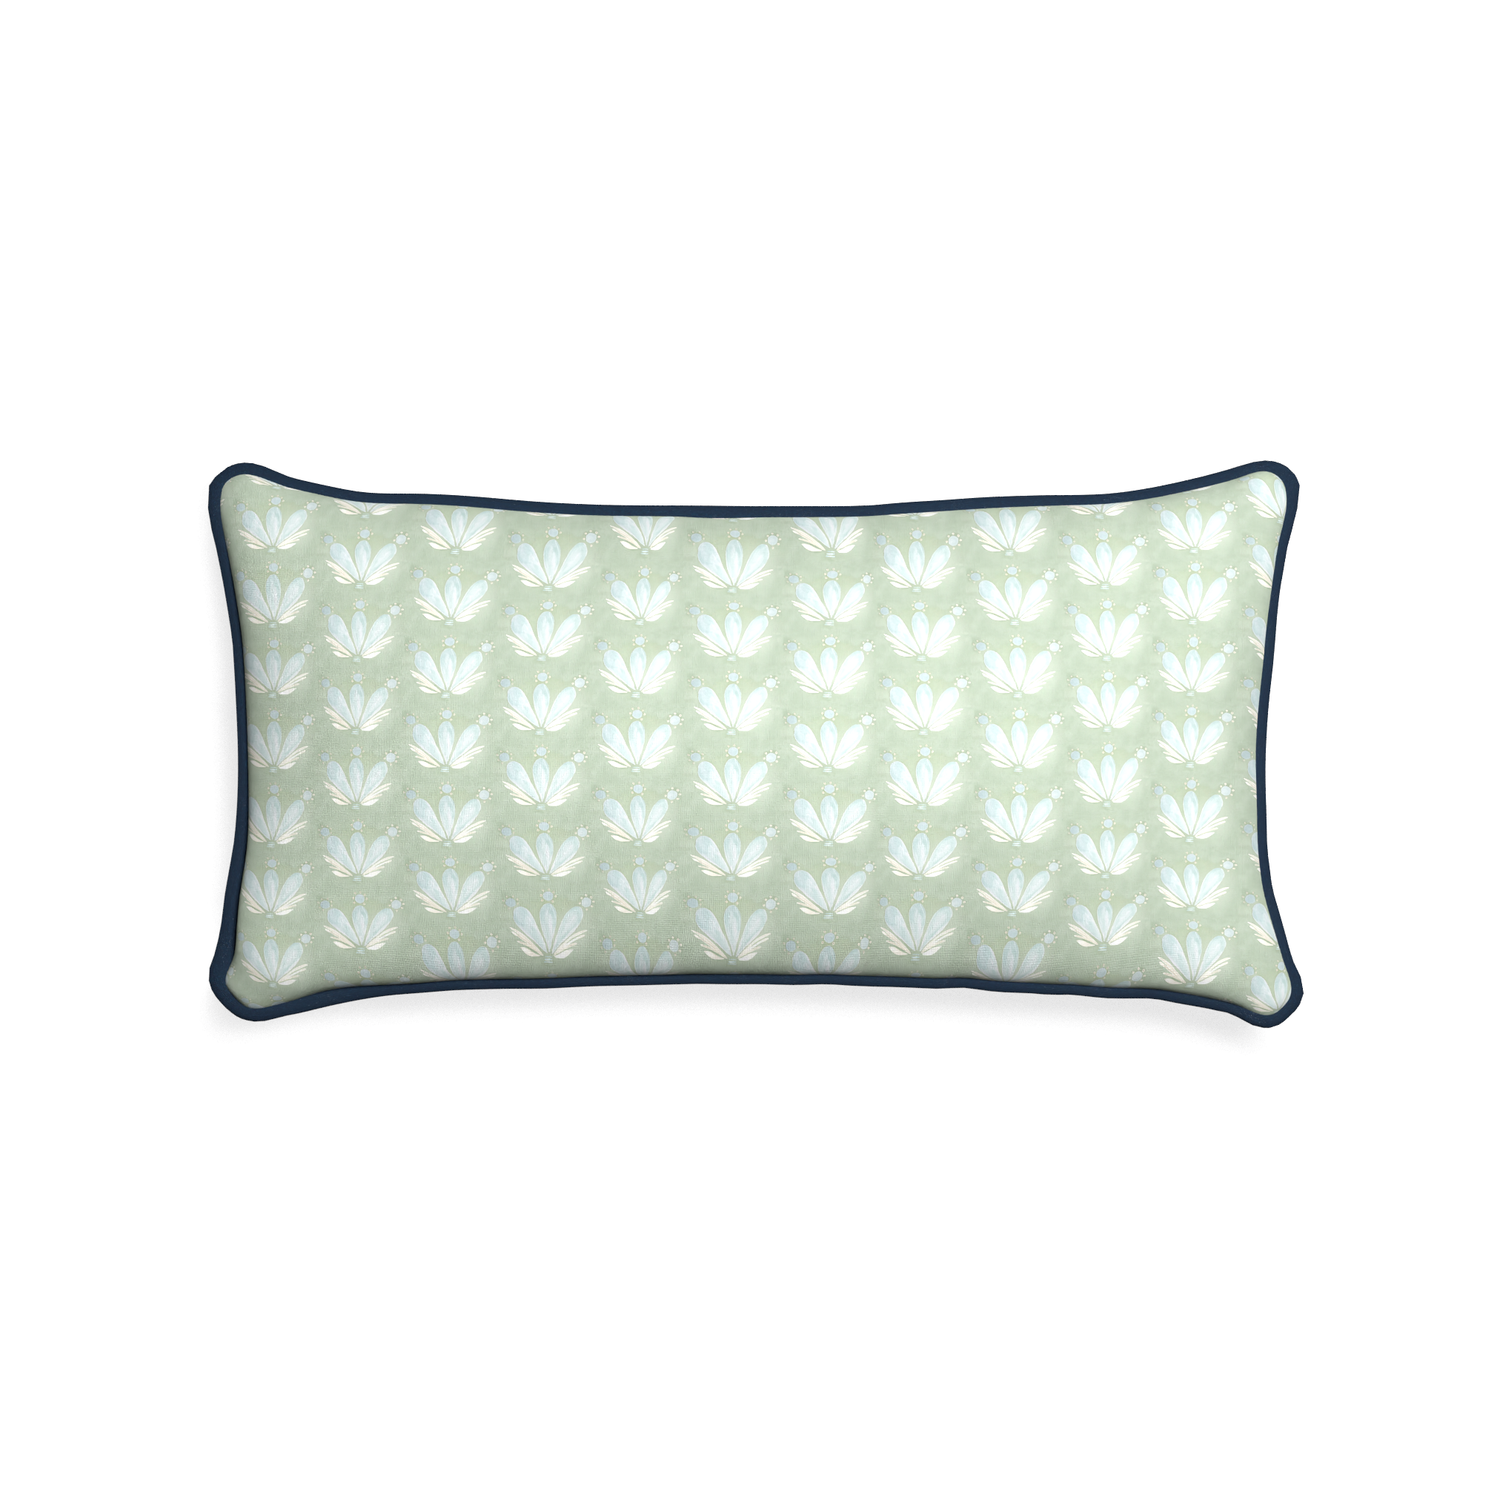 Midi-lumbar serena sea salt custom blue & green floral drop repeatpillow with c piping on white background